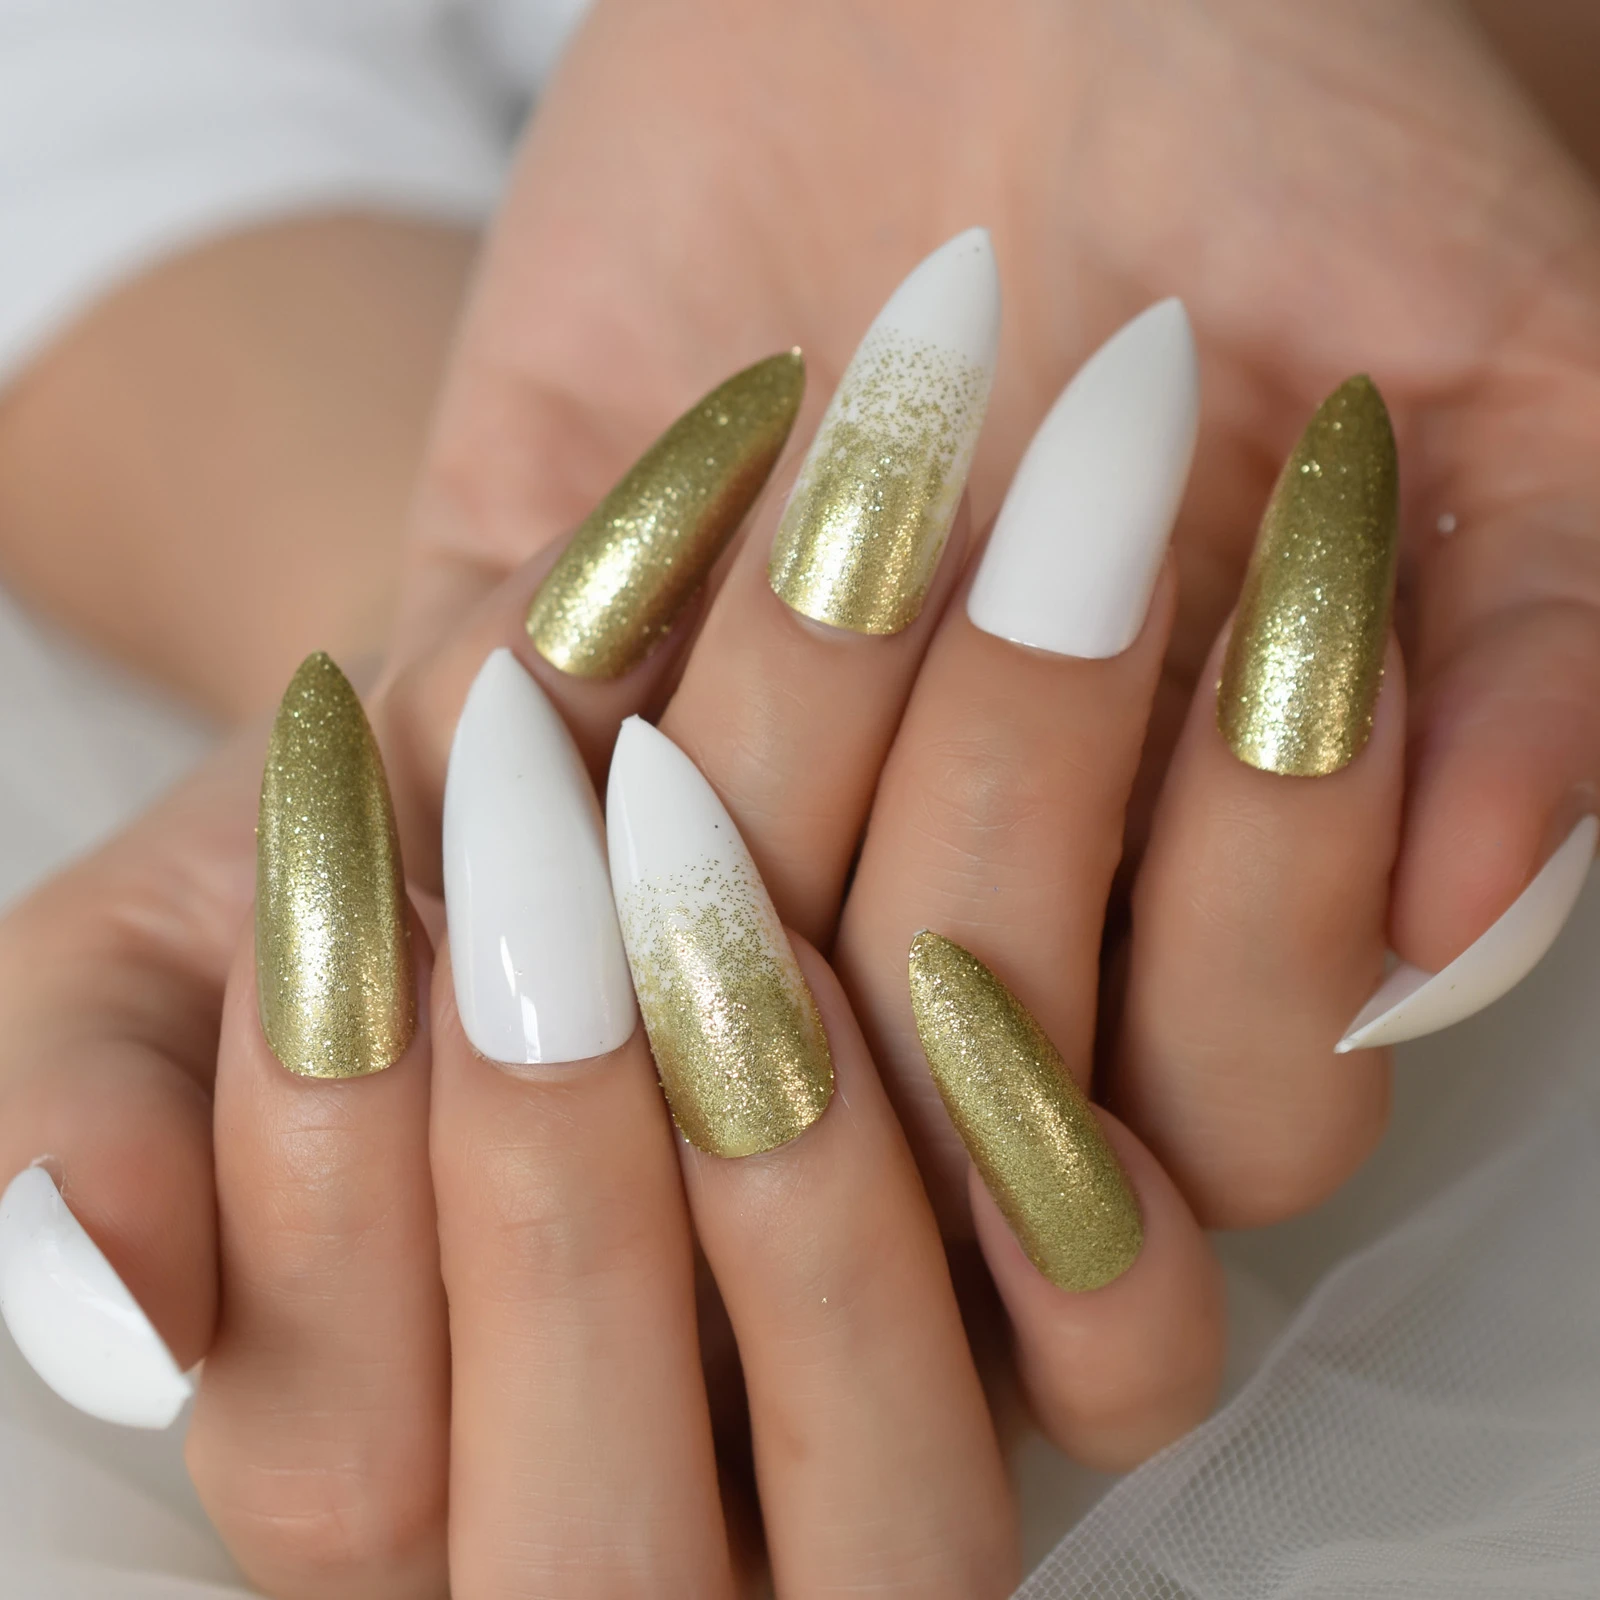 White Extra Long Stiletto Fake Nails Gold Glitter Gradient Shimmer Ladies Fingernails  Manicure Tips For Party 24pcs - False Nails - AliExpress